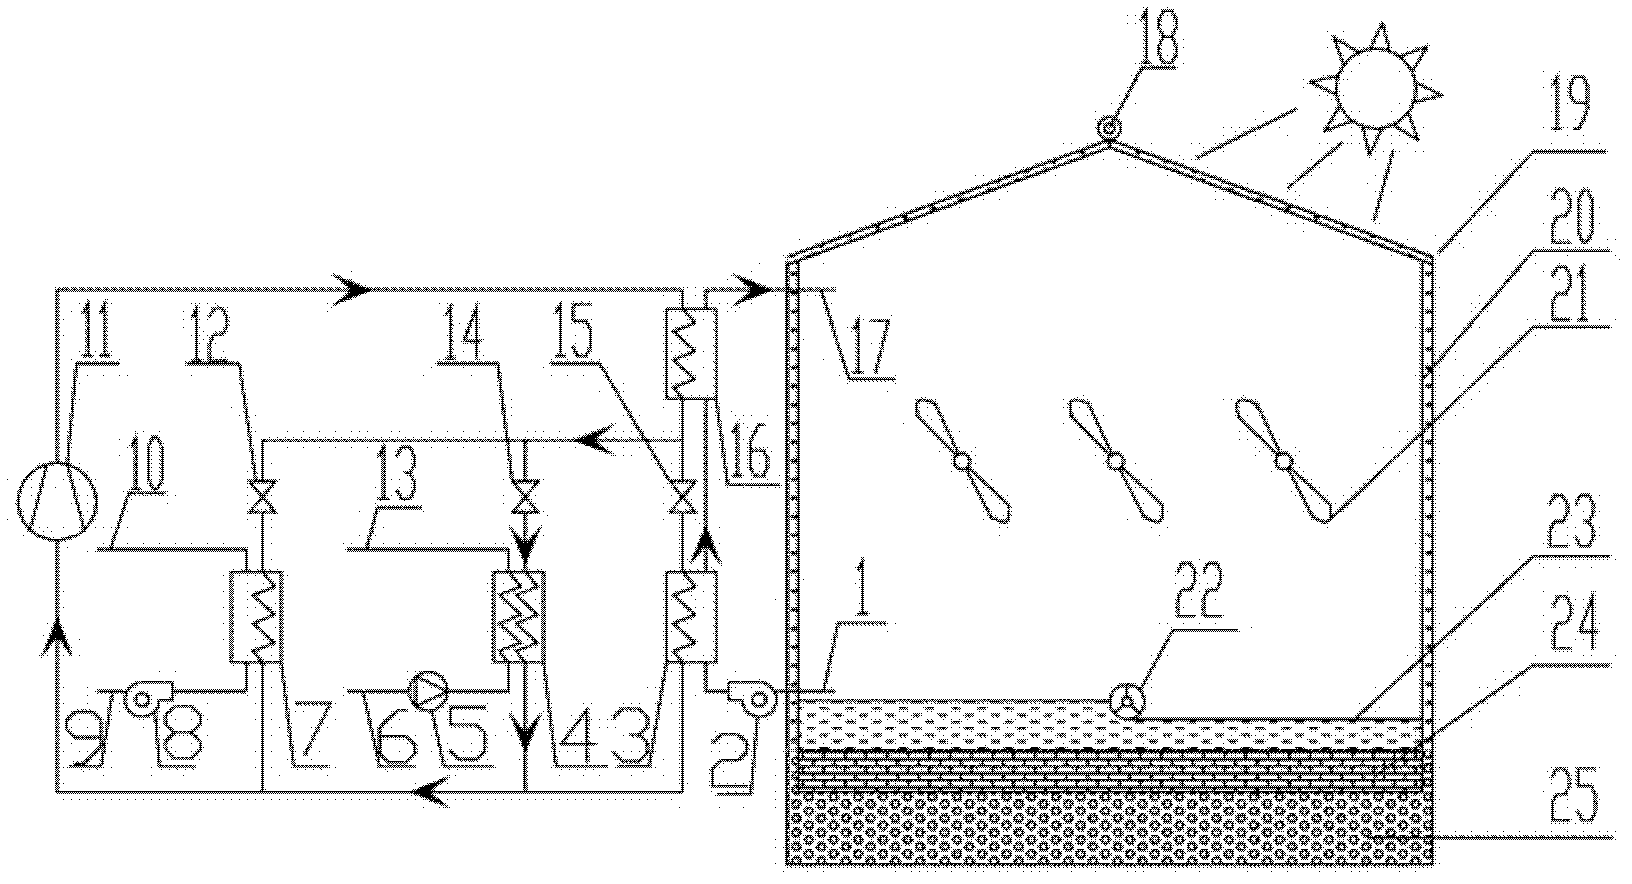 Sludge drying system of combined solar energy and multi-source heat pump